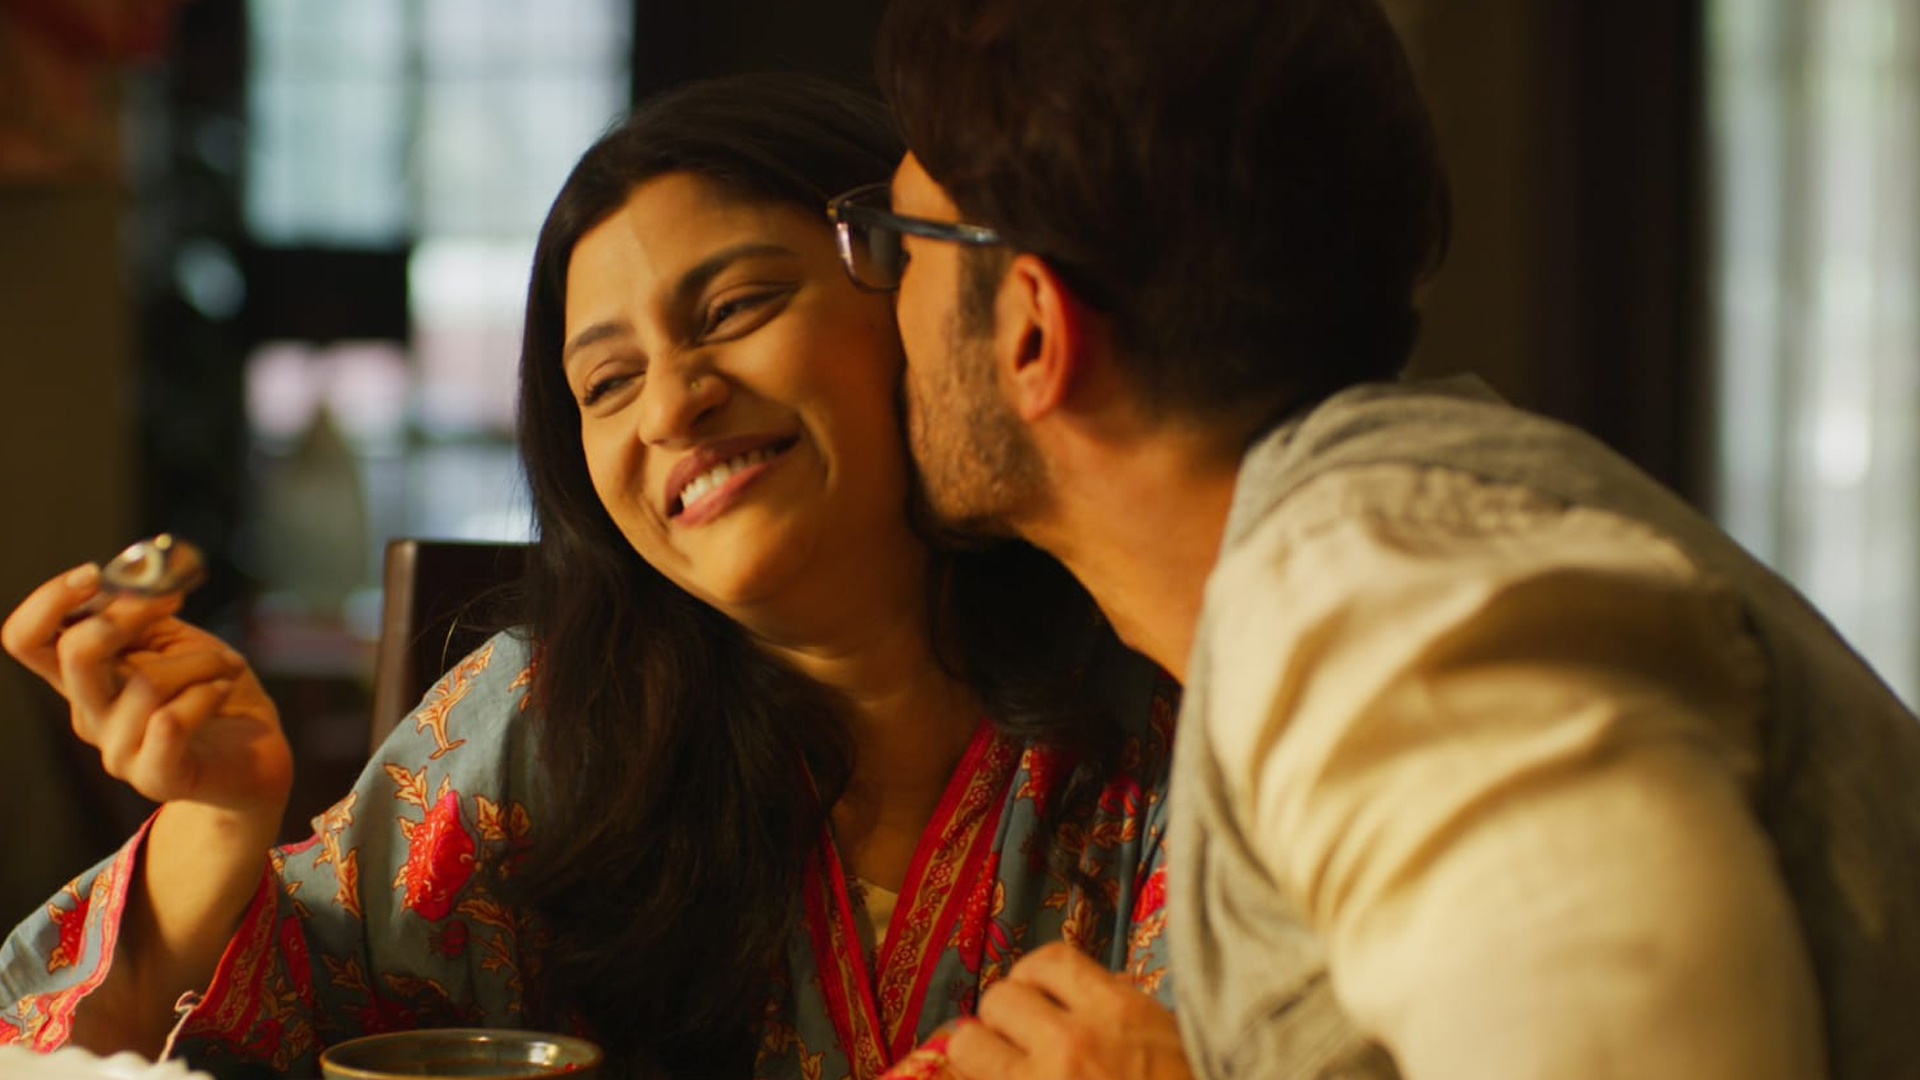 Aparna Sen’s “The Rapist”, produced by Applause Entertainment and Quest Films, had its Indian premiere at the prestigious International Film Festival of Kerala